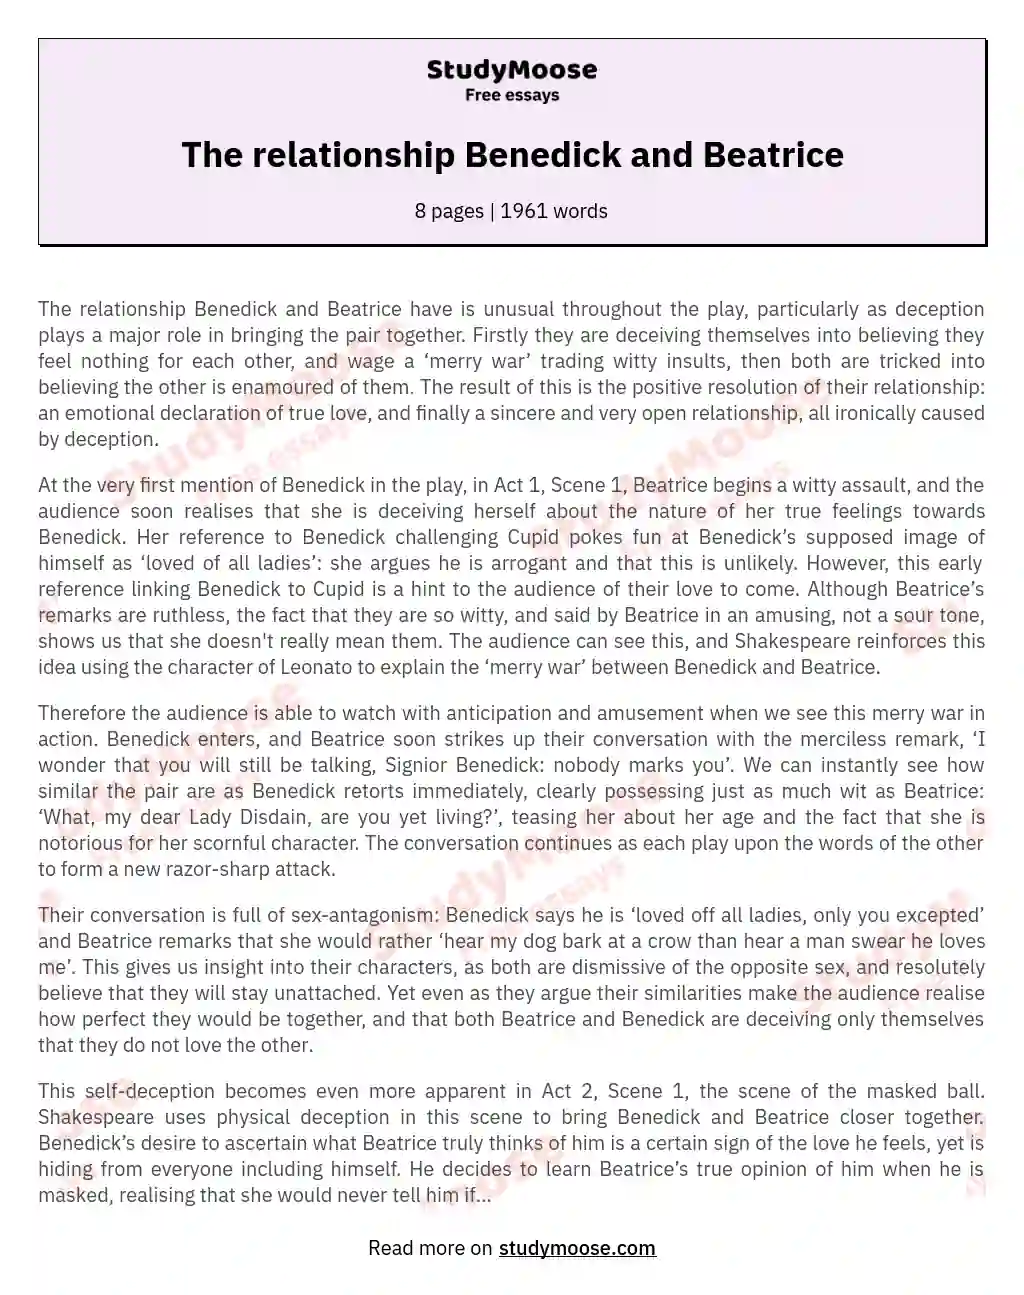 The relationship Benedick and Beatrice essay